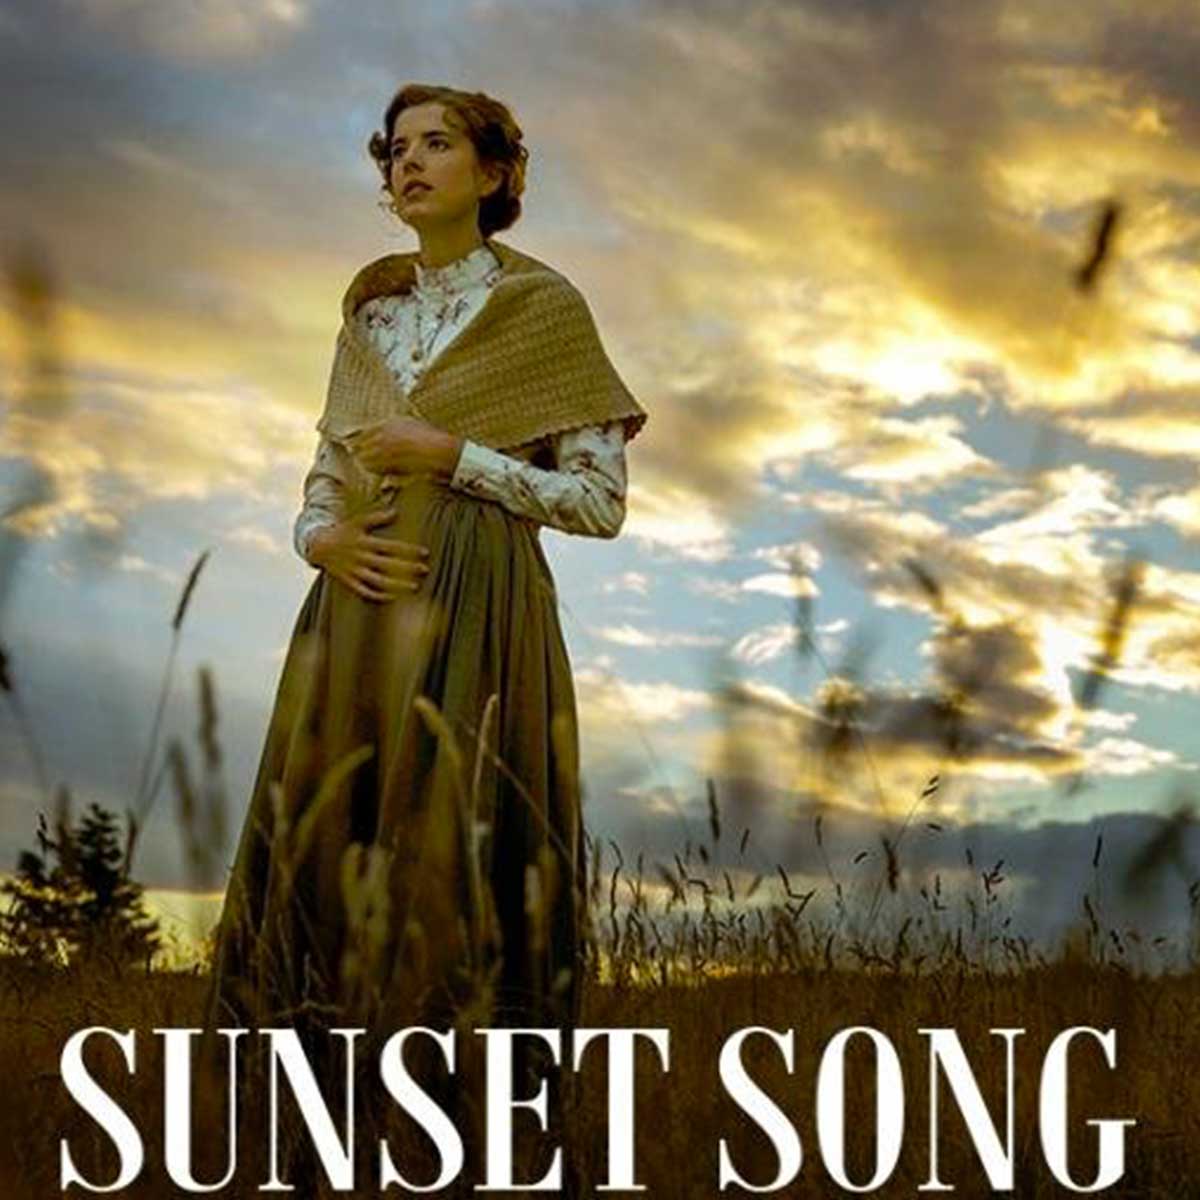 sunset song